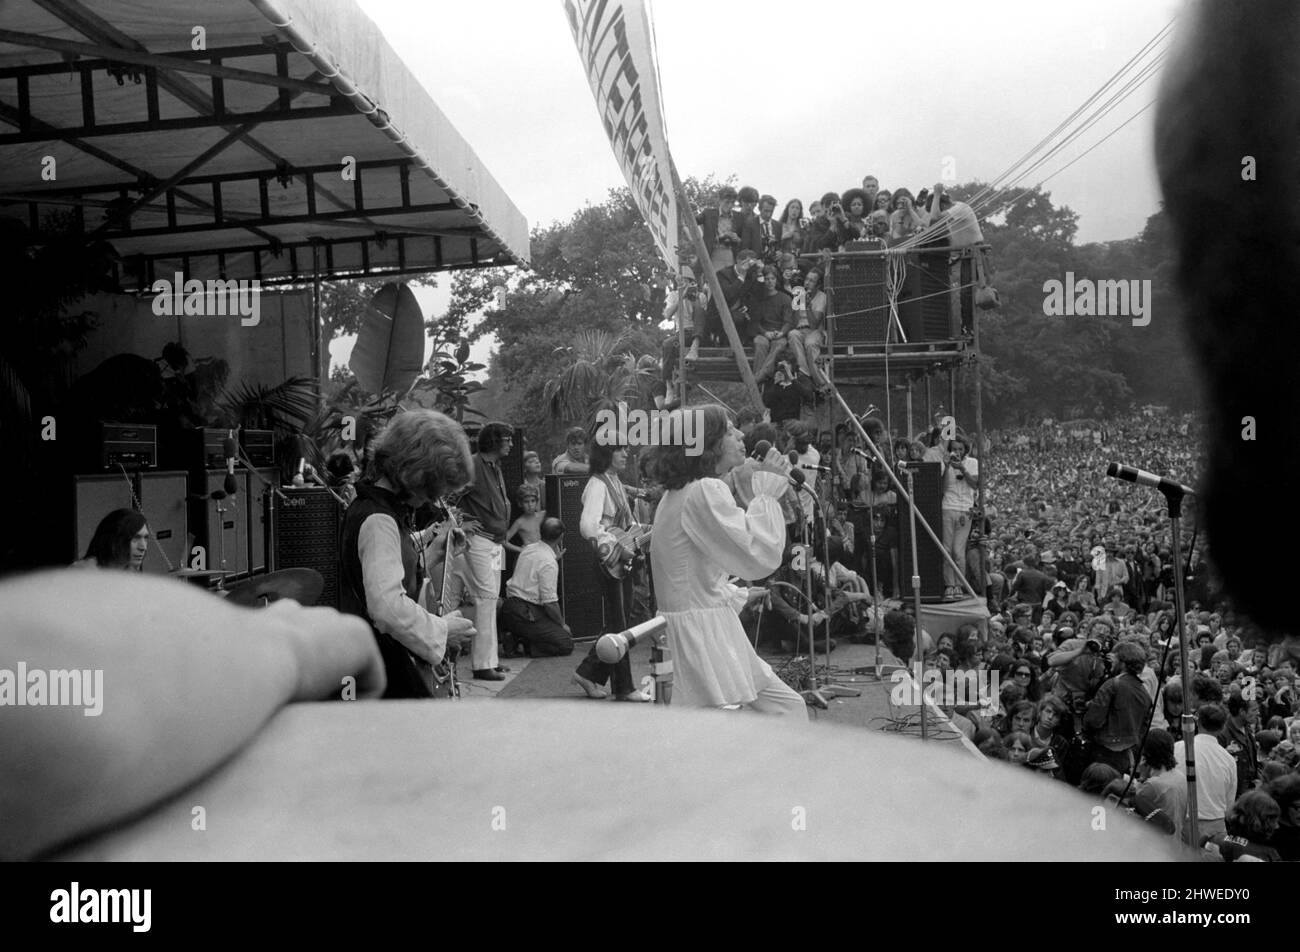 The Rolling Stones on stage at their free concert in London's Hyde Park on  5 July 1969 Stock Photo - Alamy